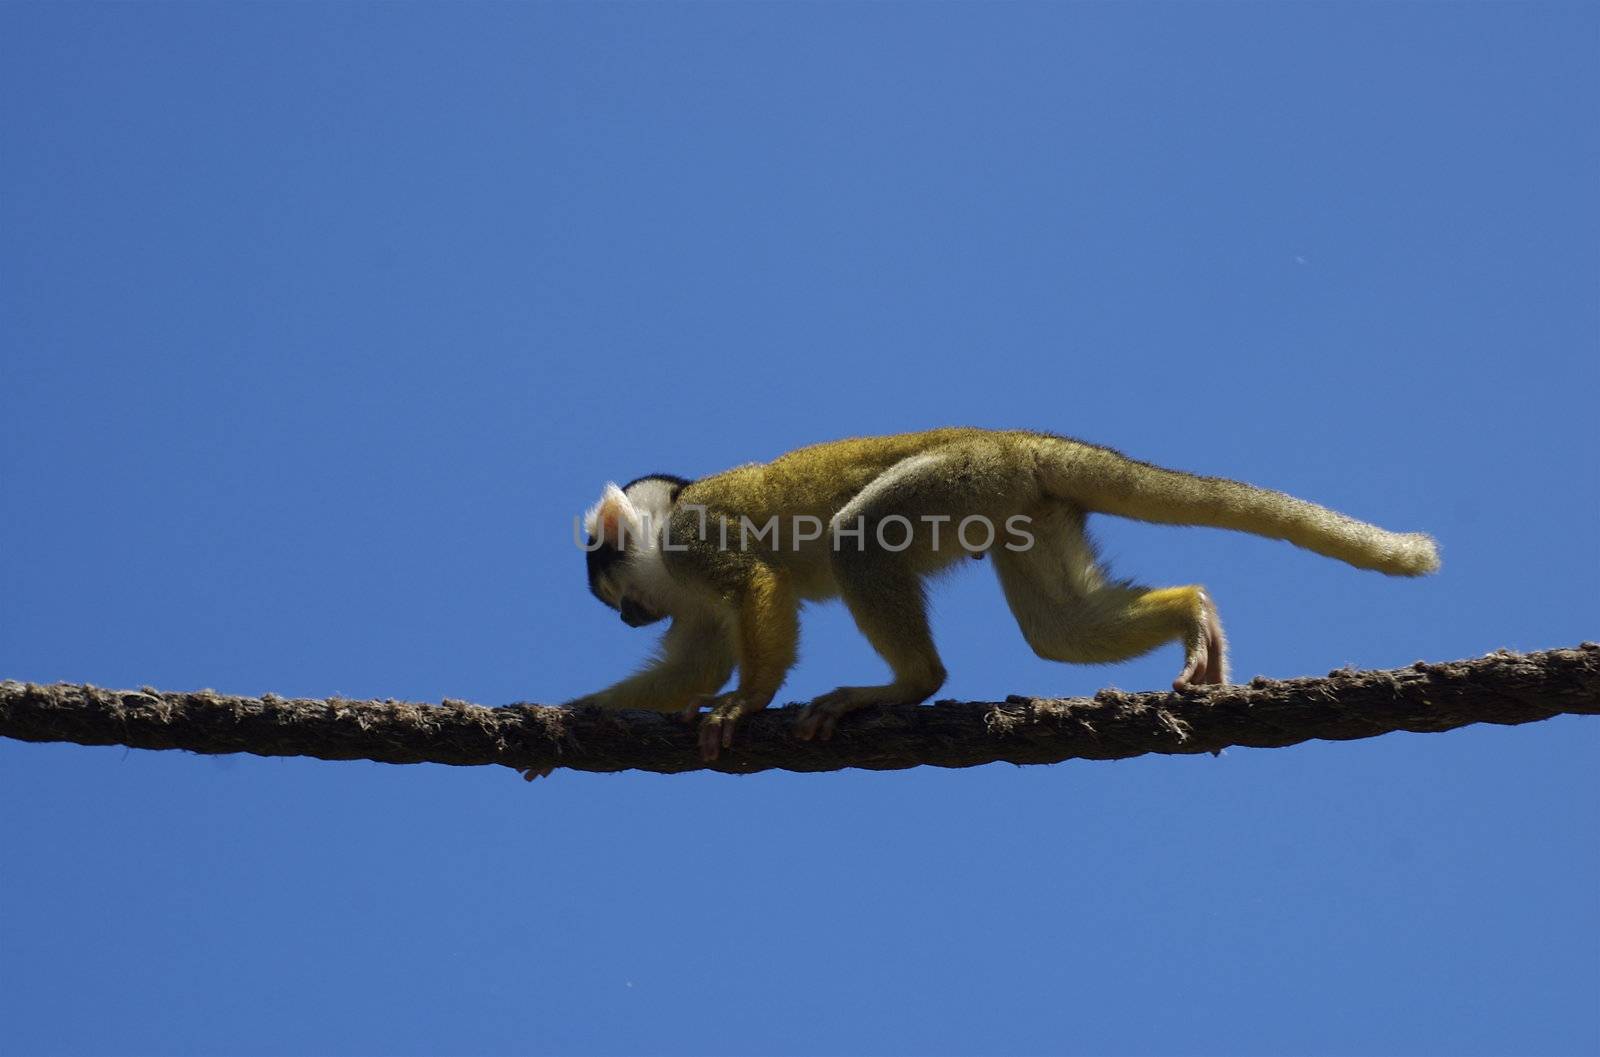 Monkey walking on a rope against a deep blue sky with copy space